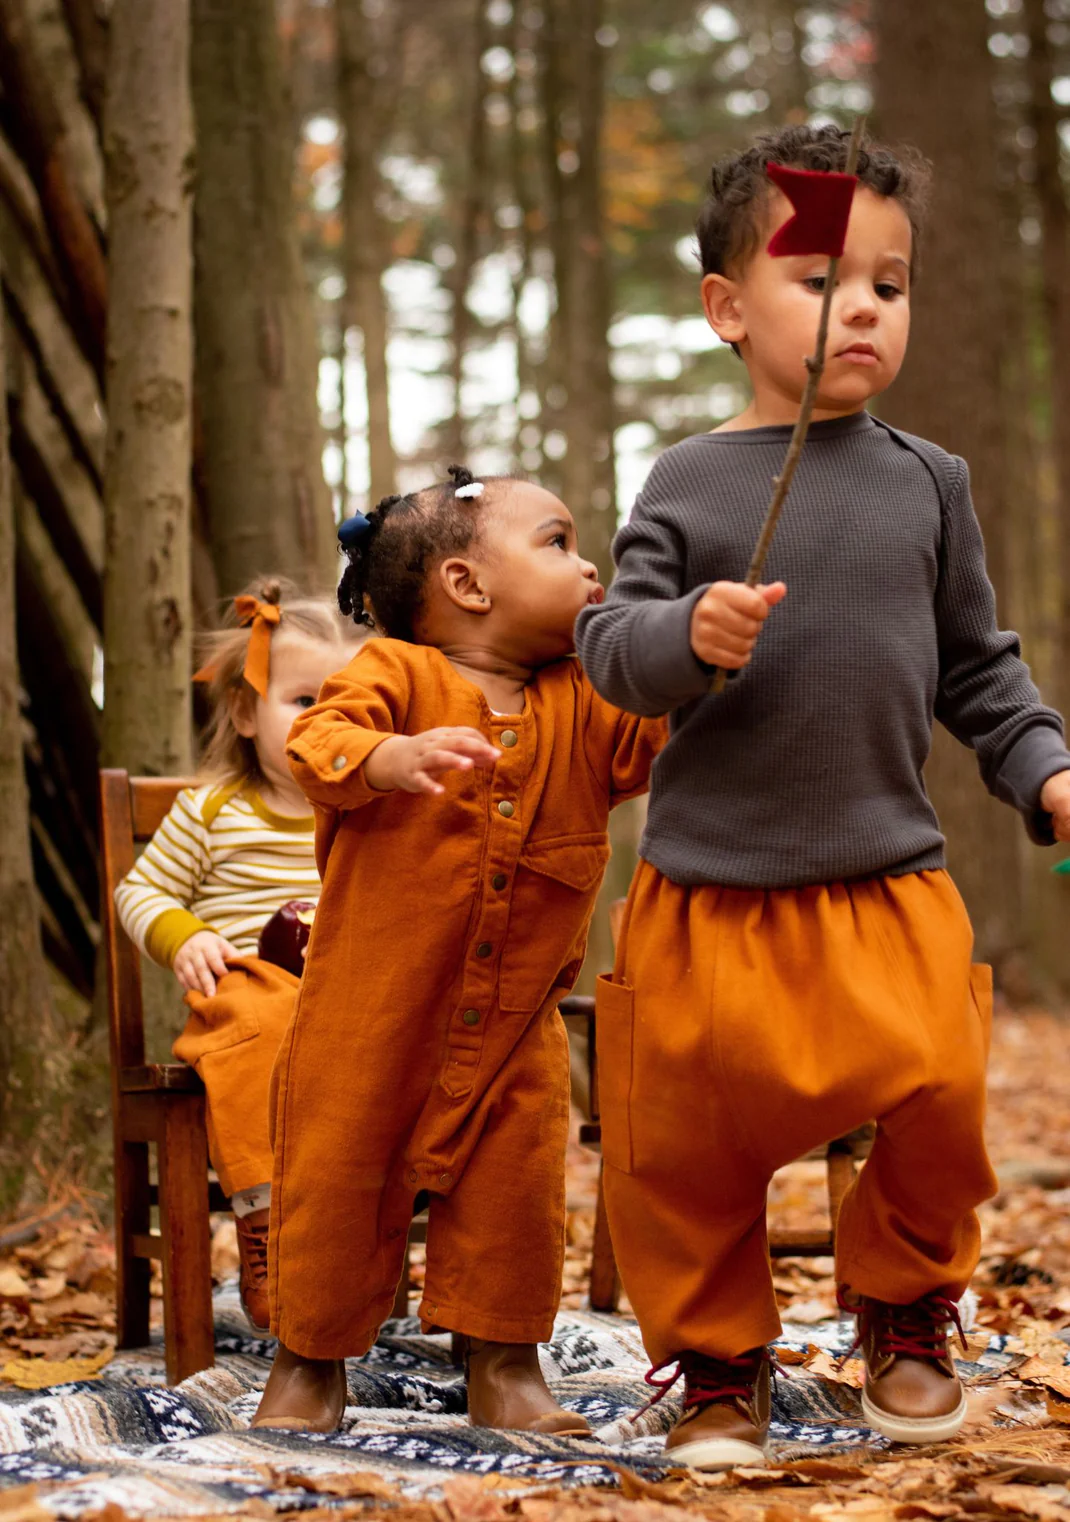 Three toddlers wearing West Rock Apparel in a forest setting.